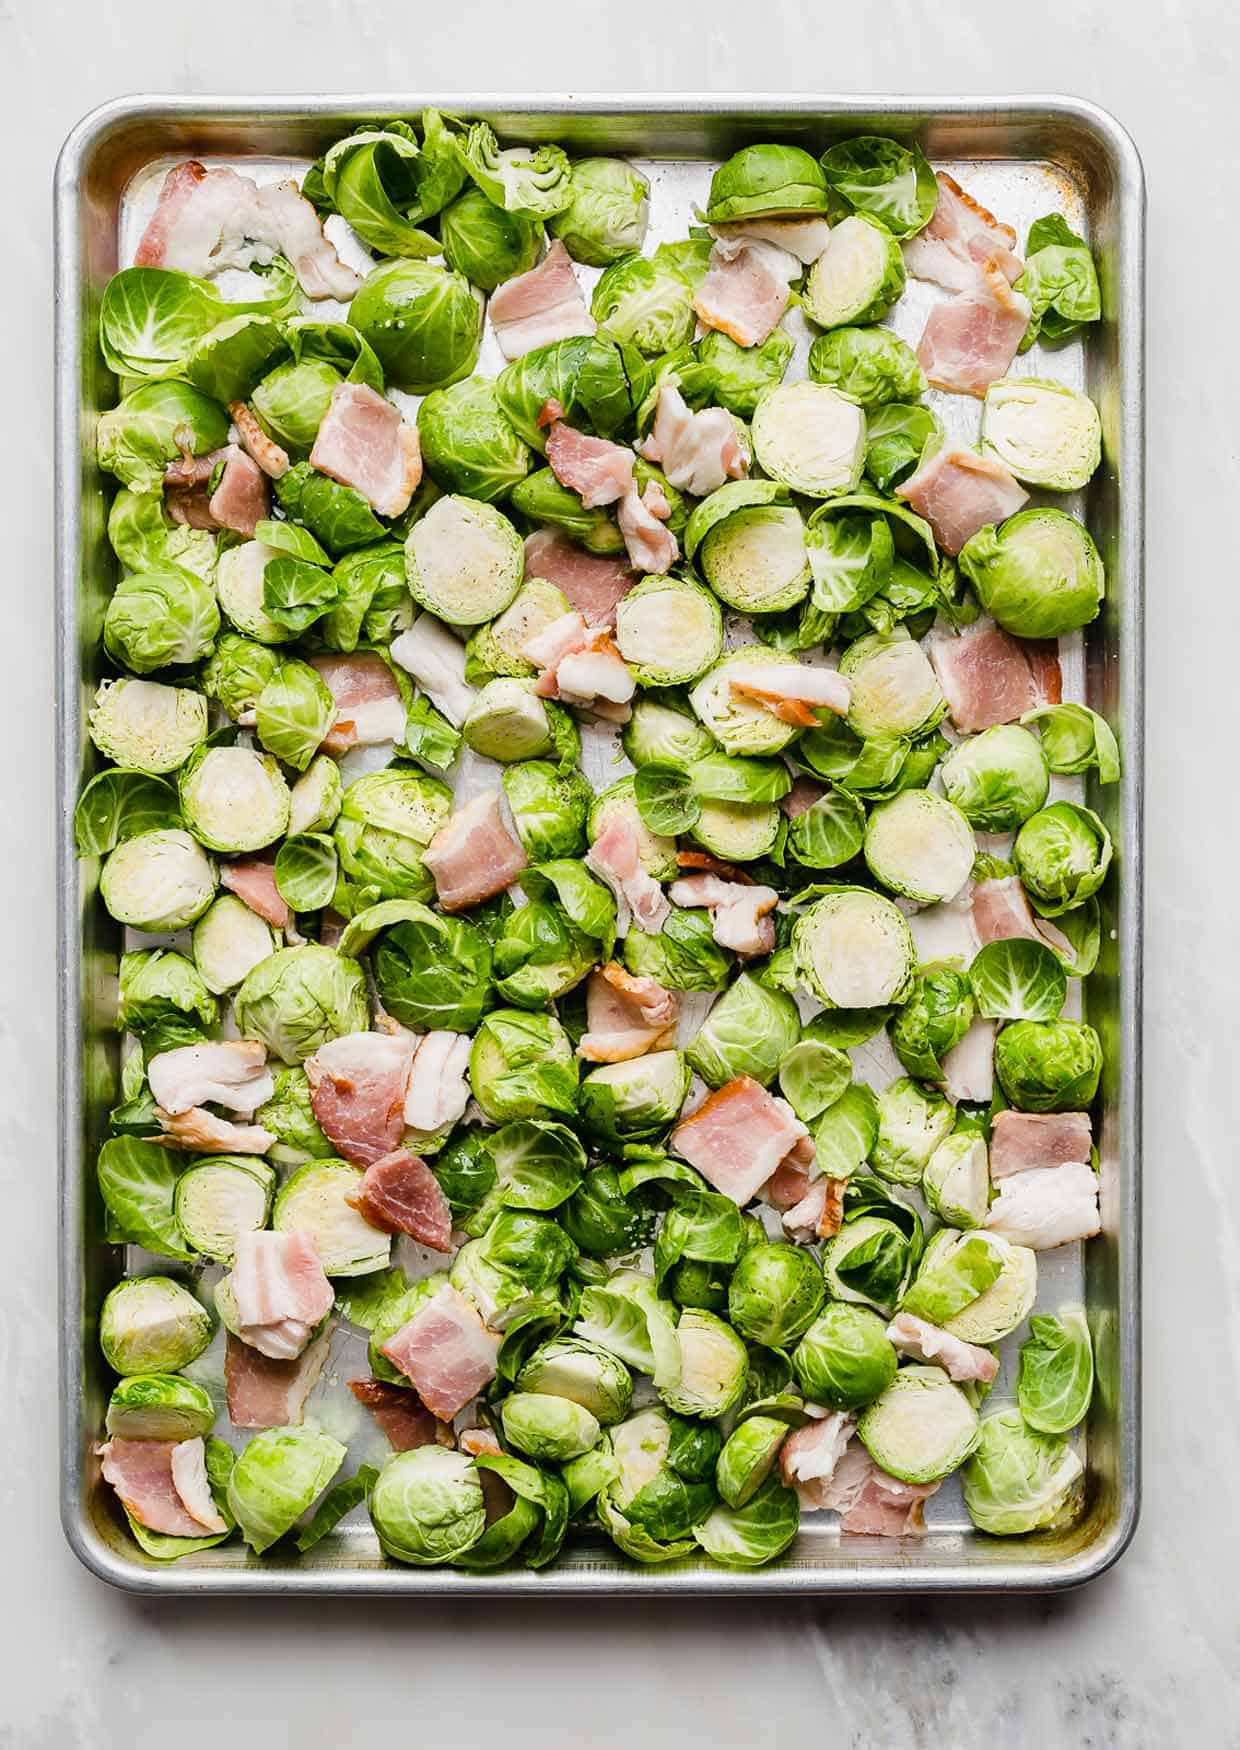 Unbaked Brussels sprouts and raw bacon chunks on a baking sheet.